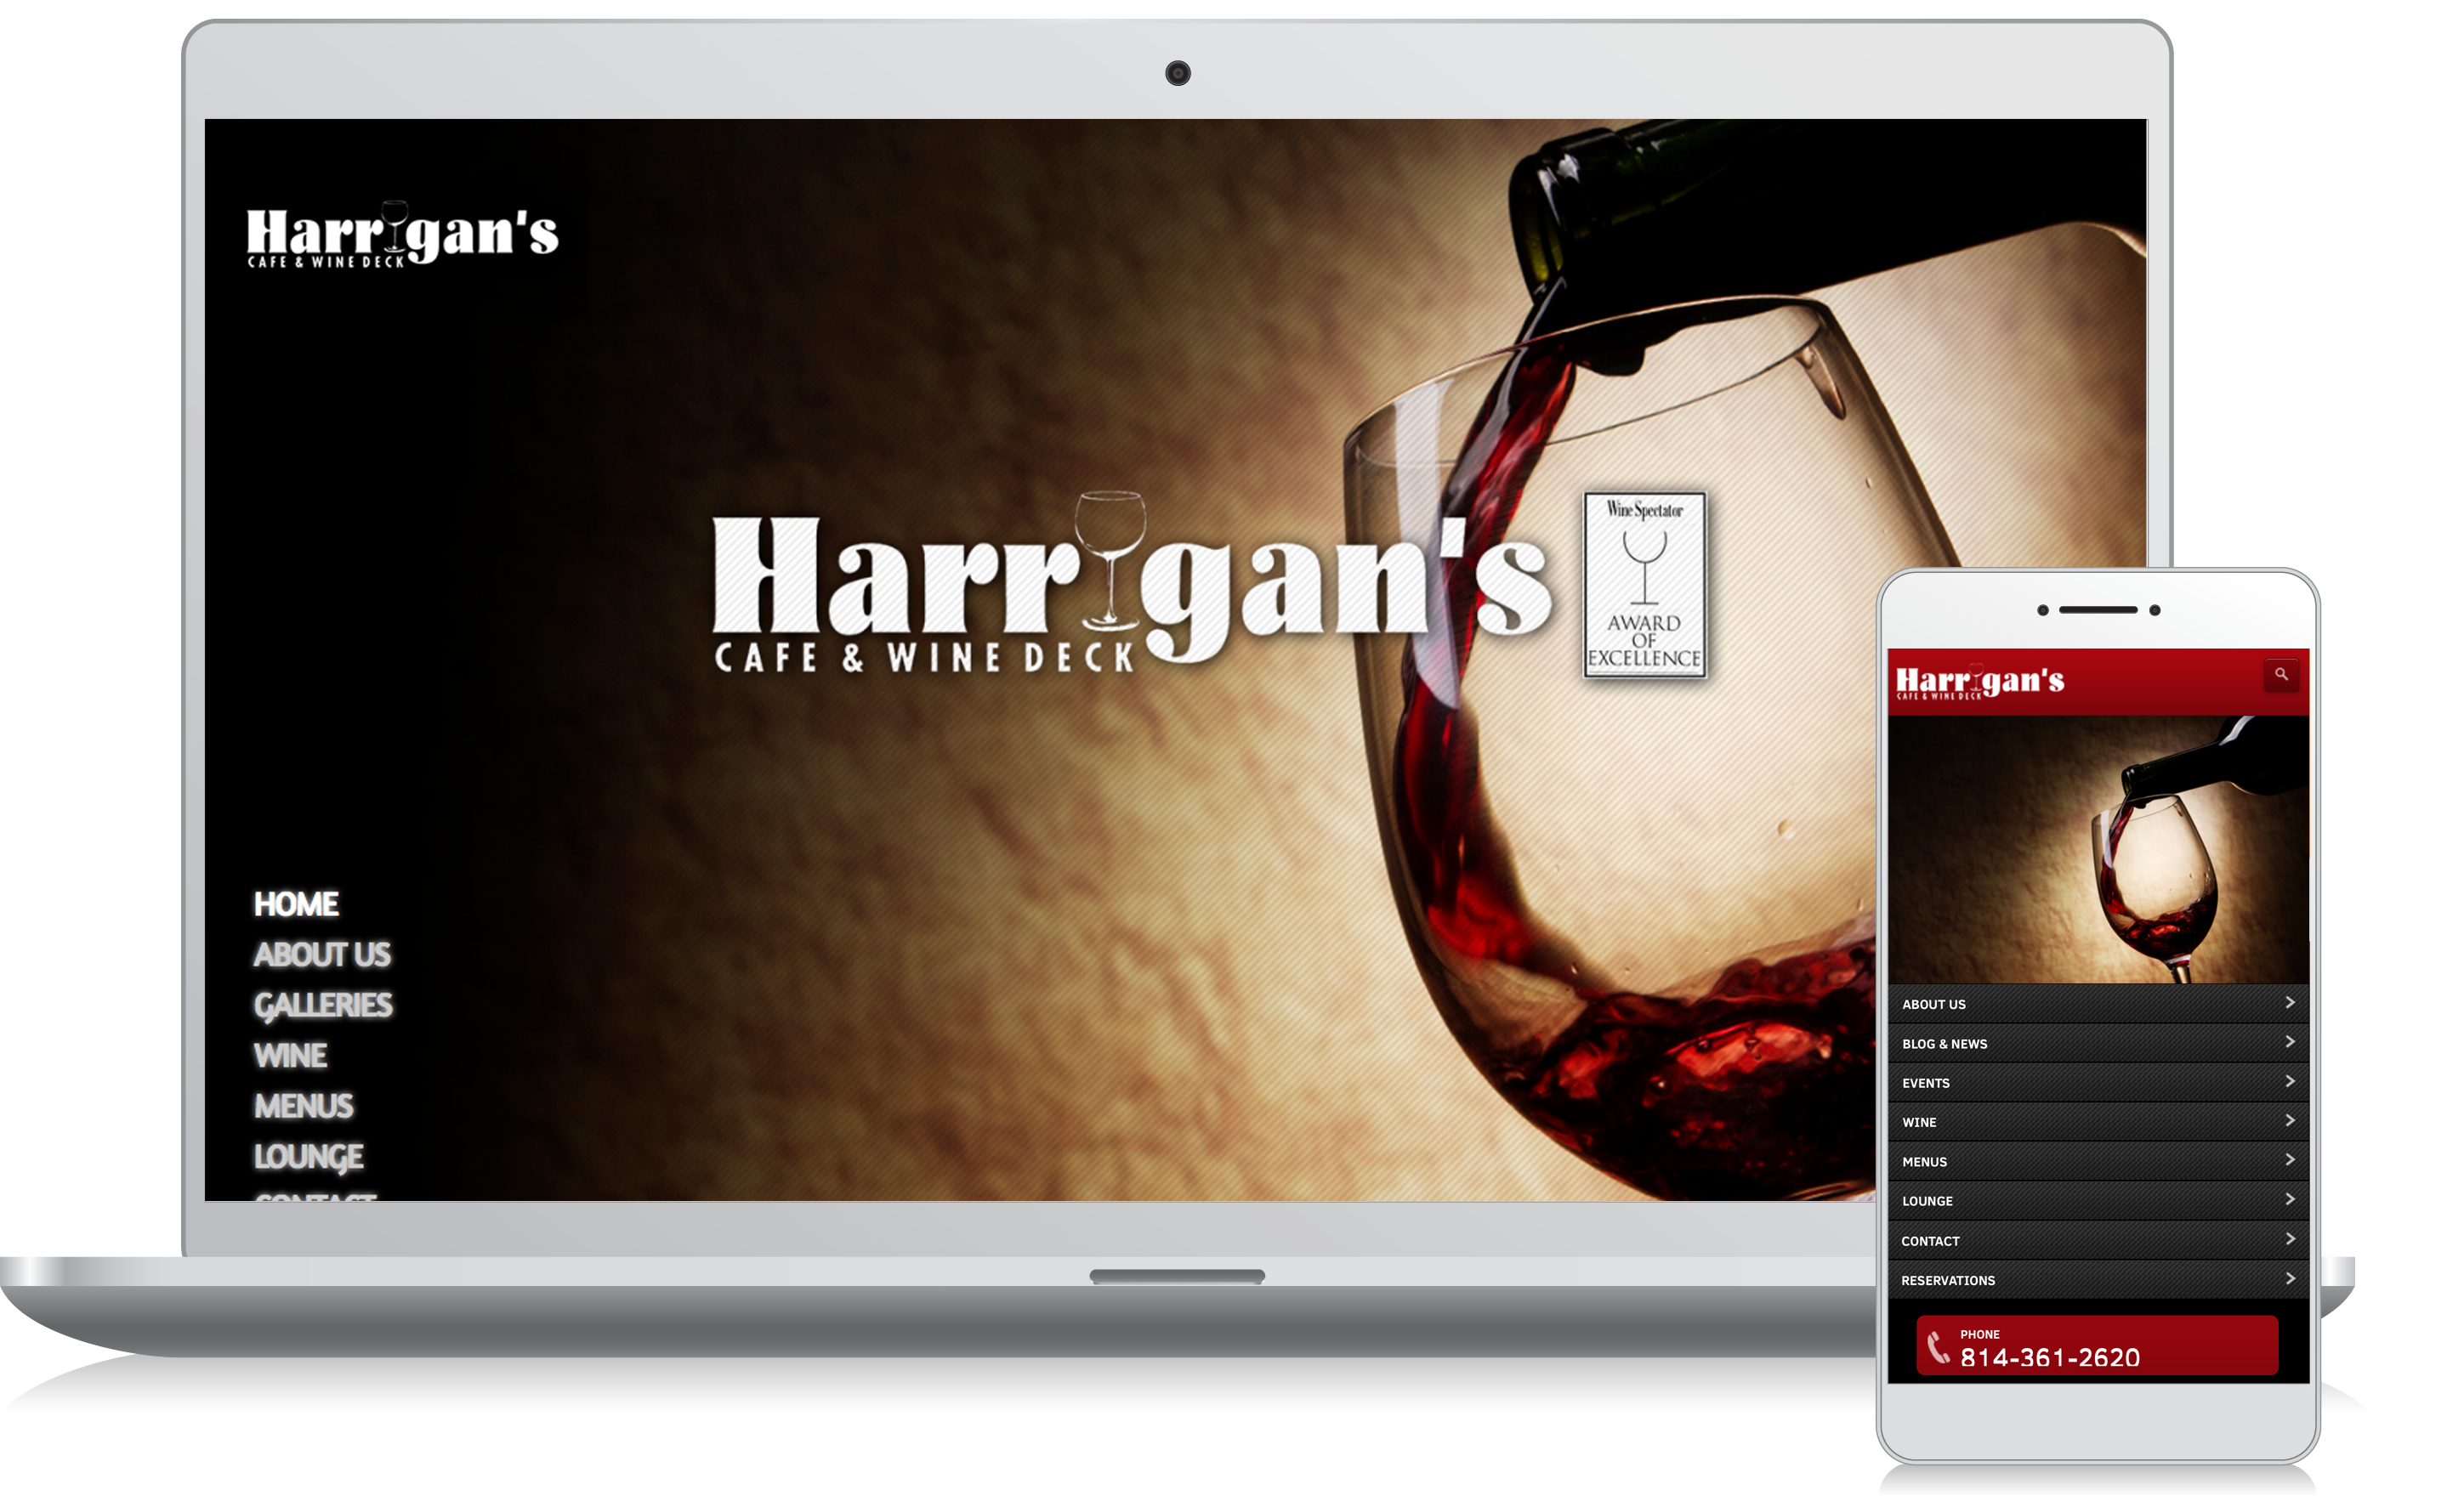 Cellphone and computer image of the Harrigan's Cafe website homepage